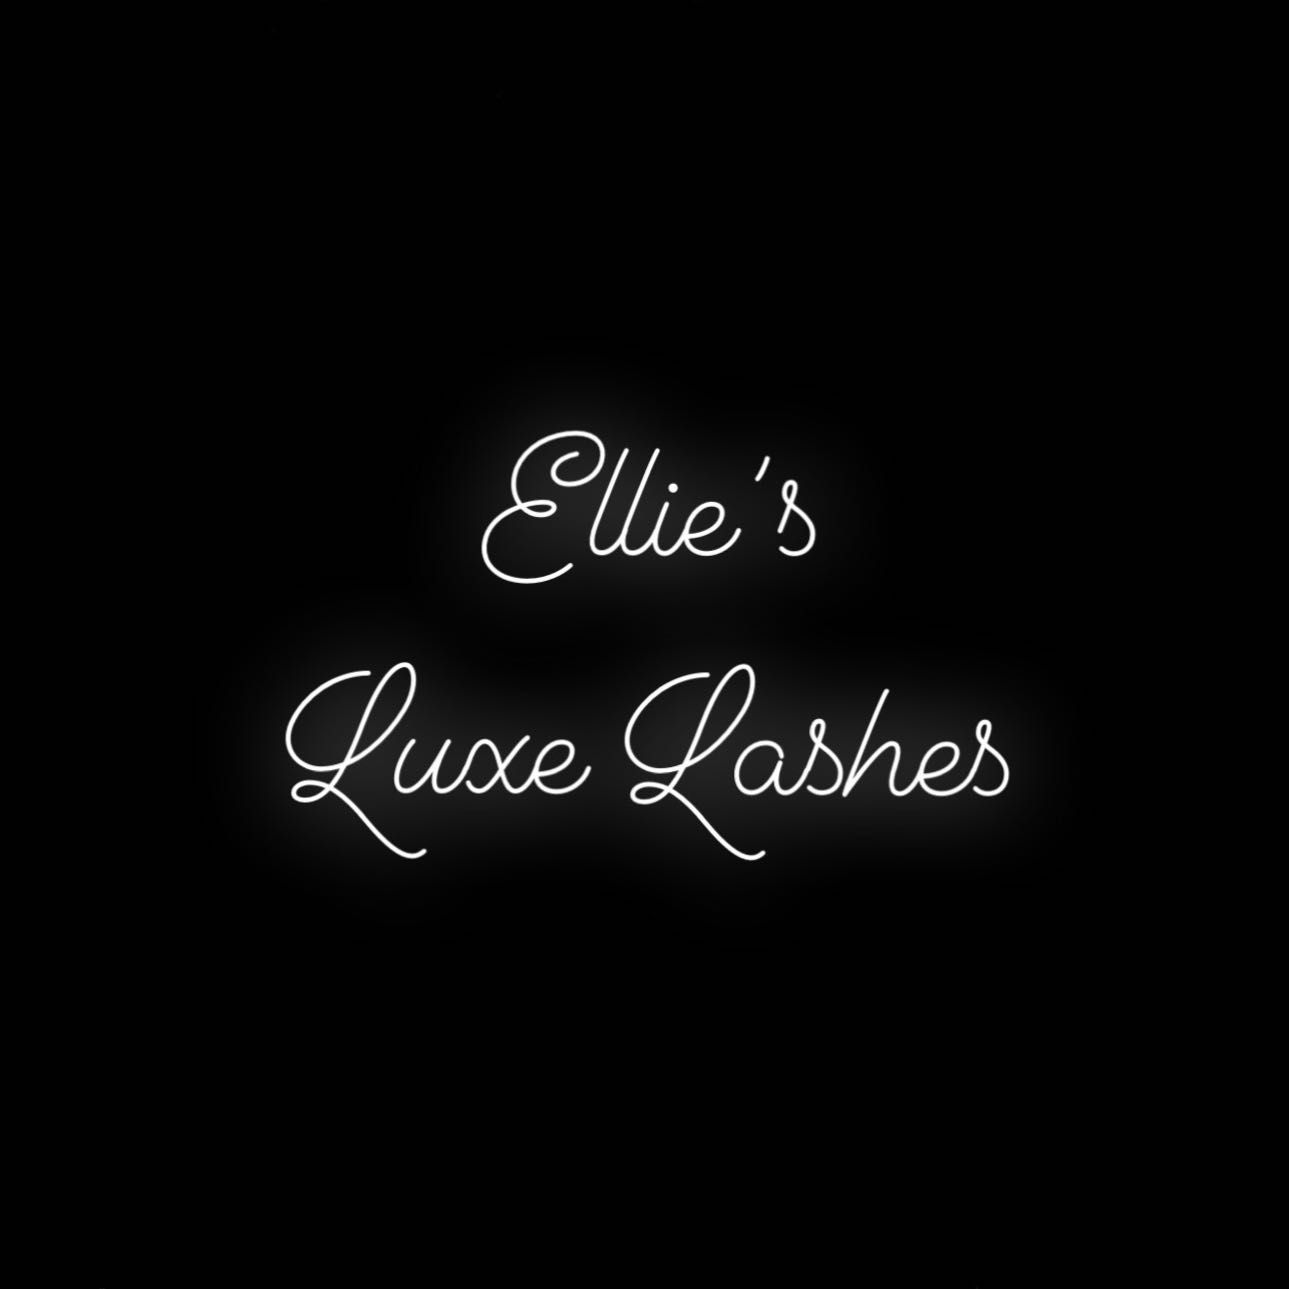 Ellie’s Luxe Lashes, 564 Oldham Road, Manchester